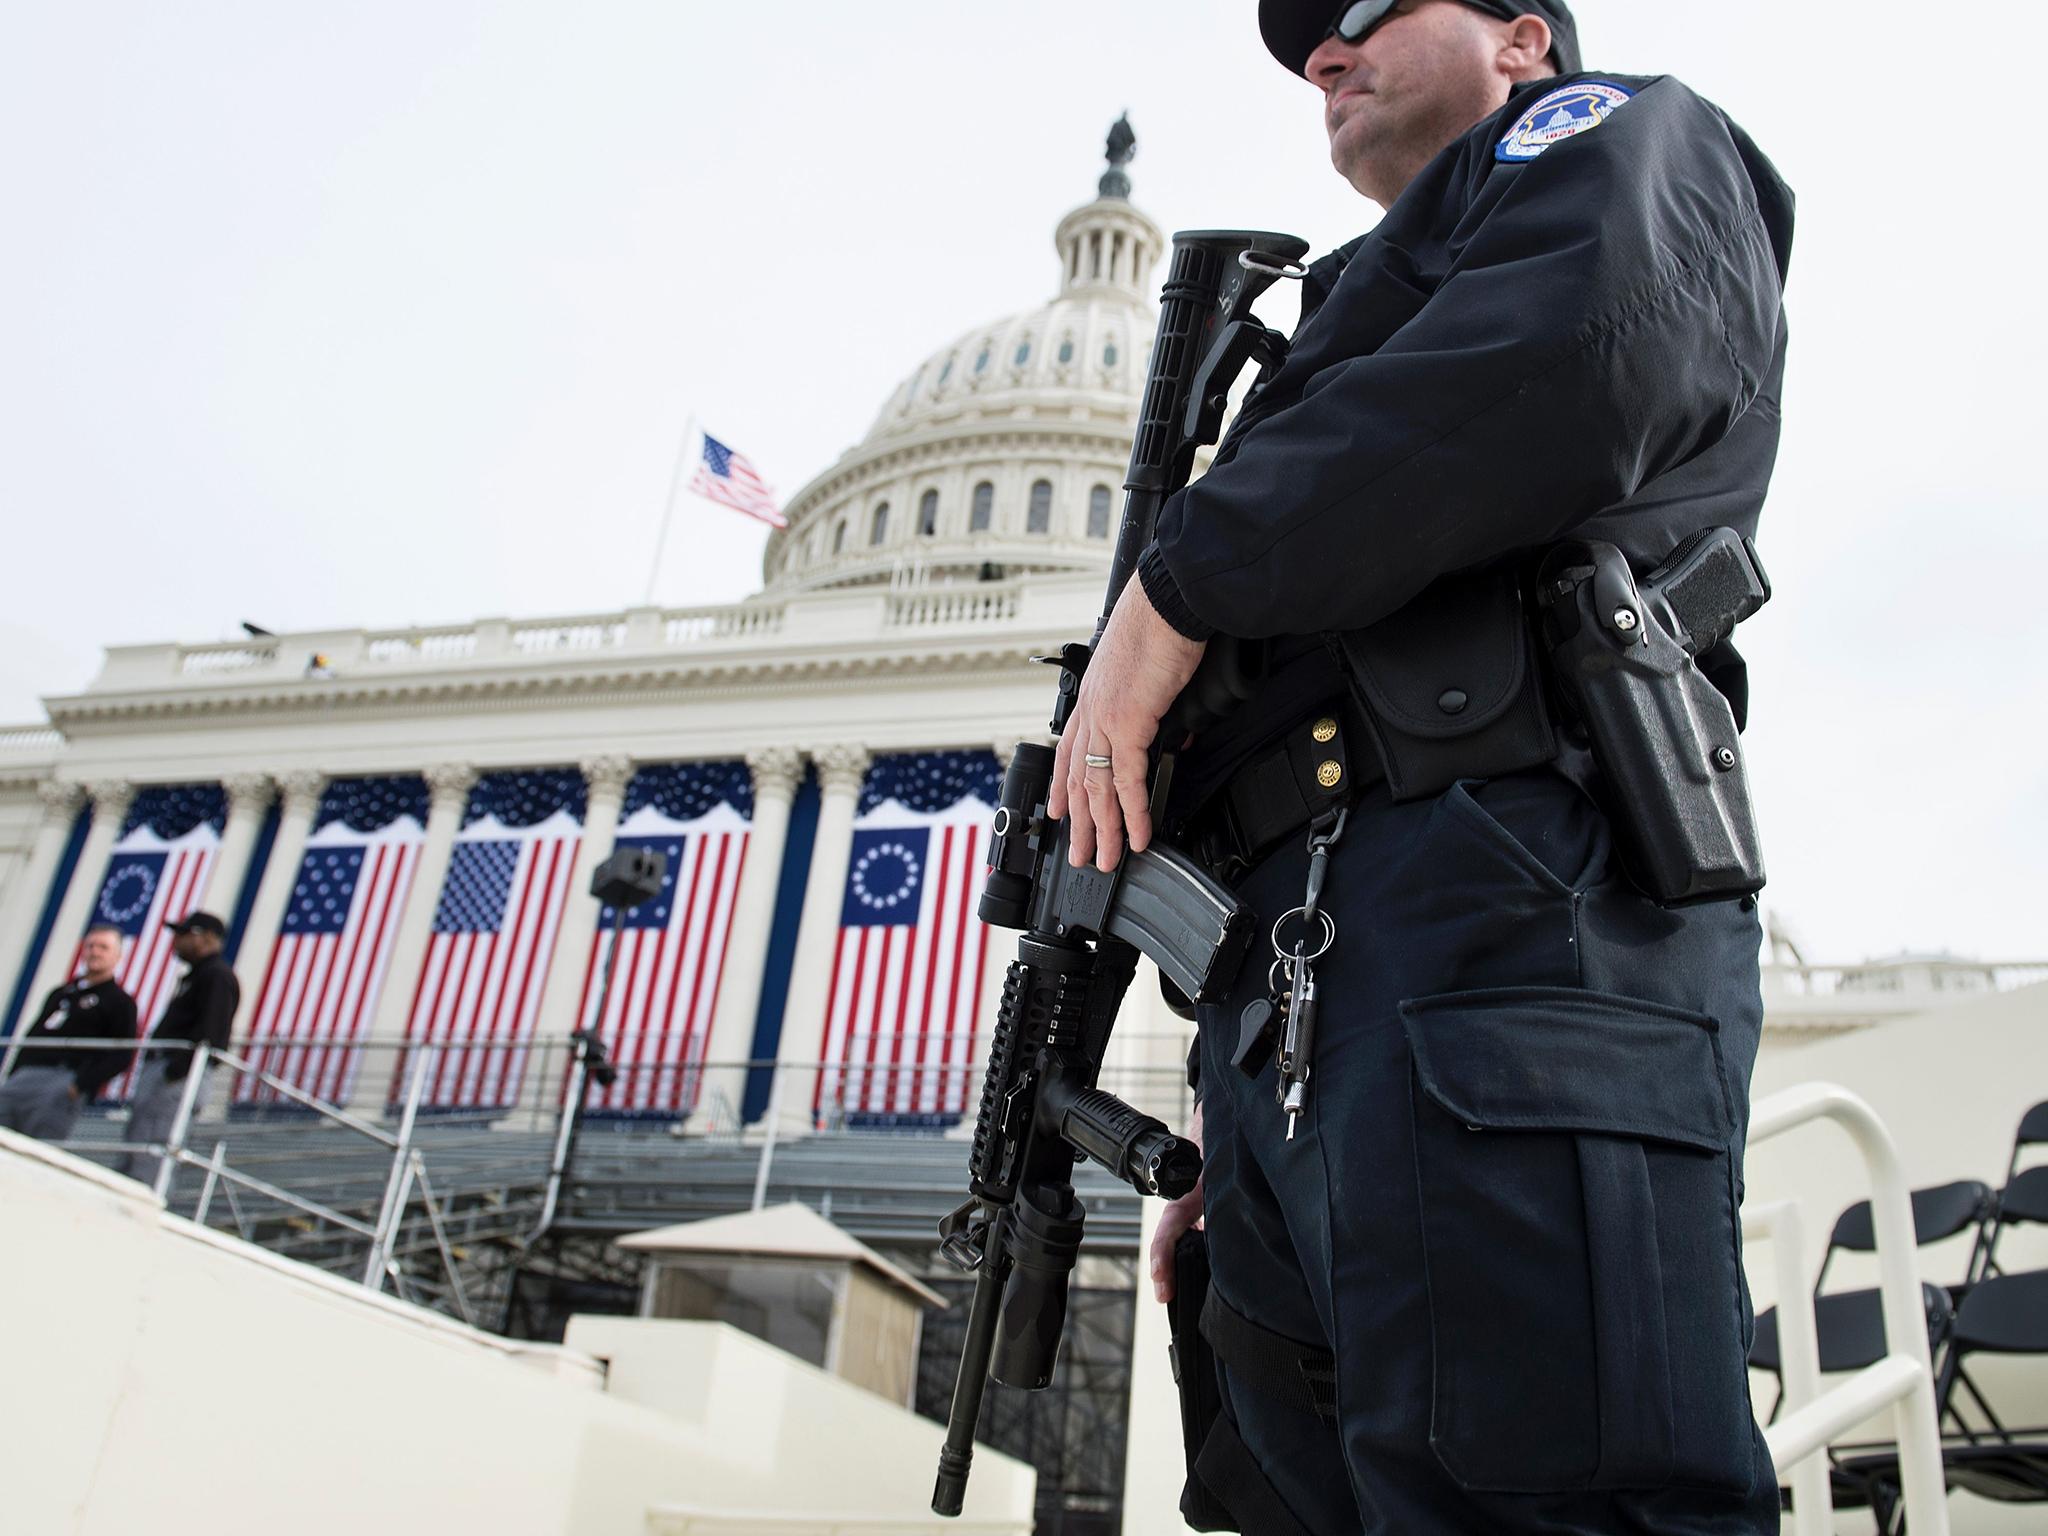 A Capitol Police Officer stands guard before tomorrow's Inauguration on Capitol Hill January 19, 2017 in Washington, DC